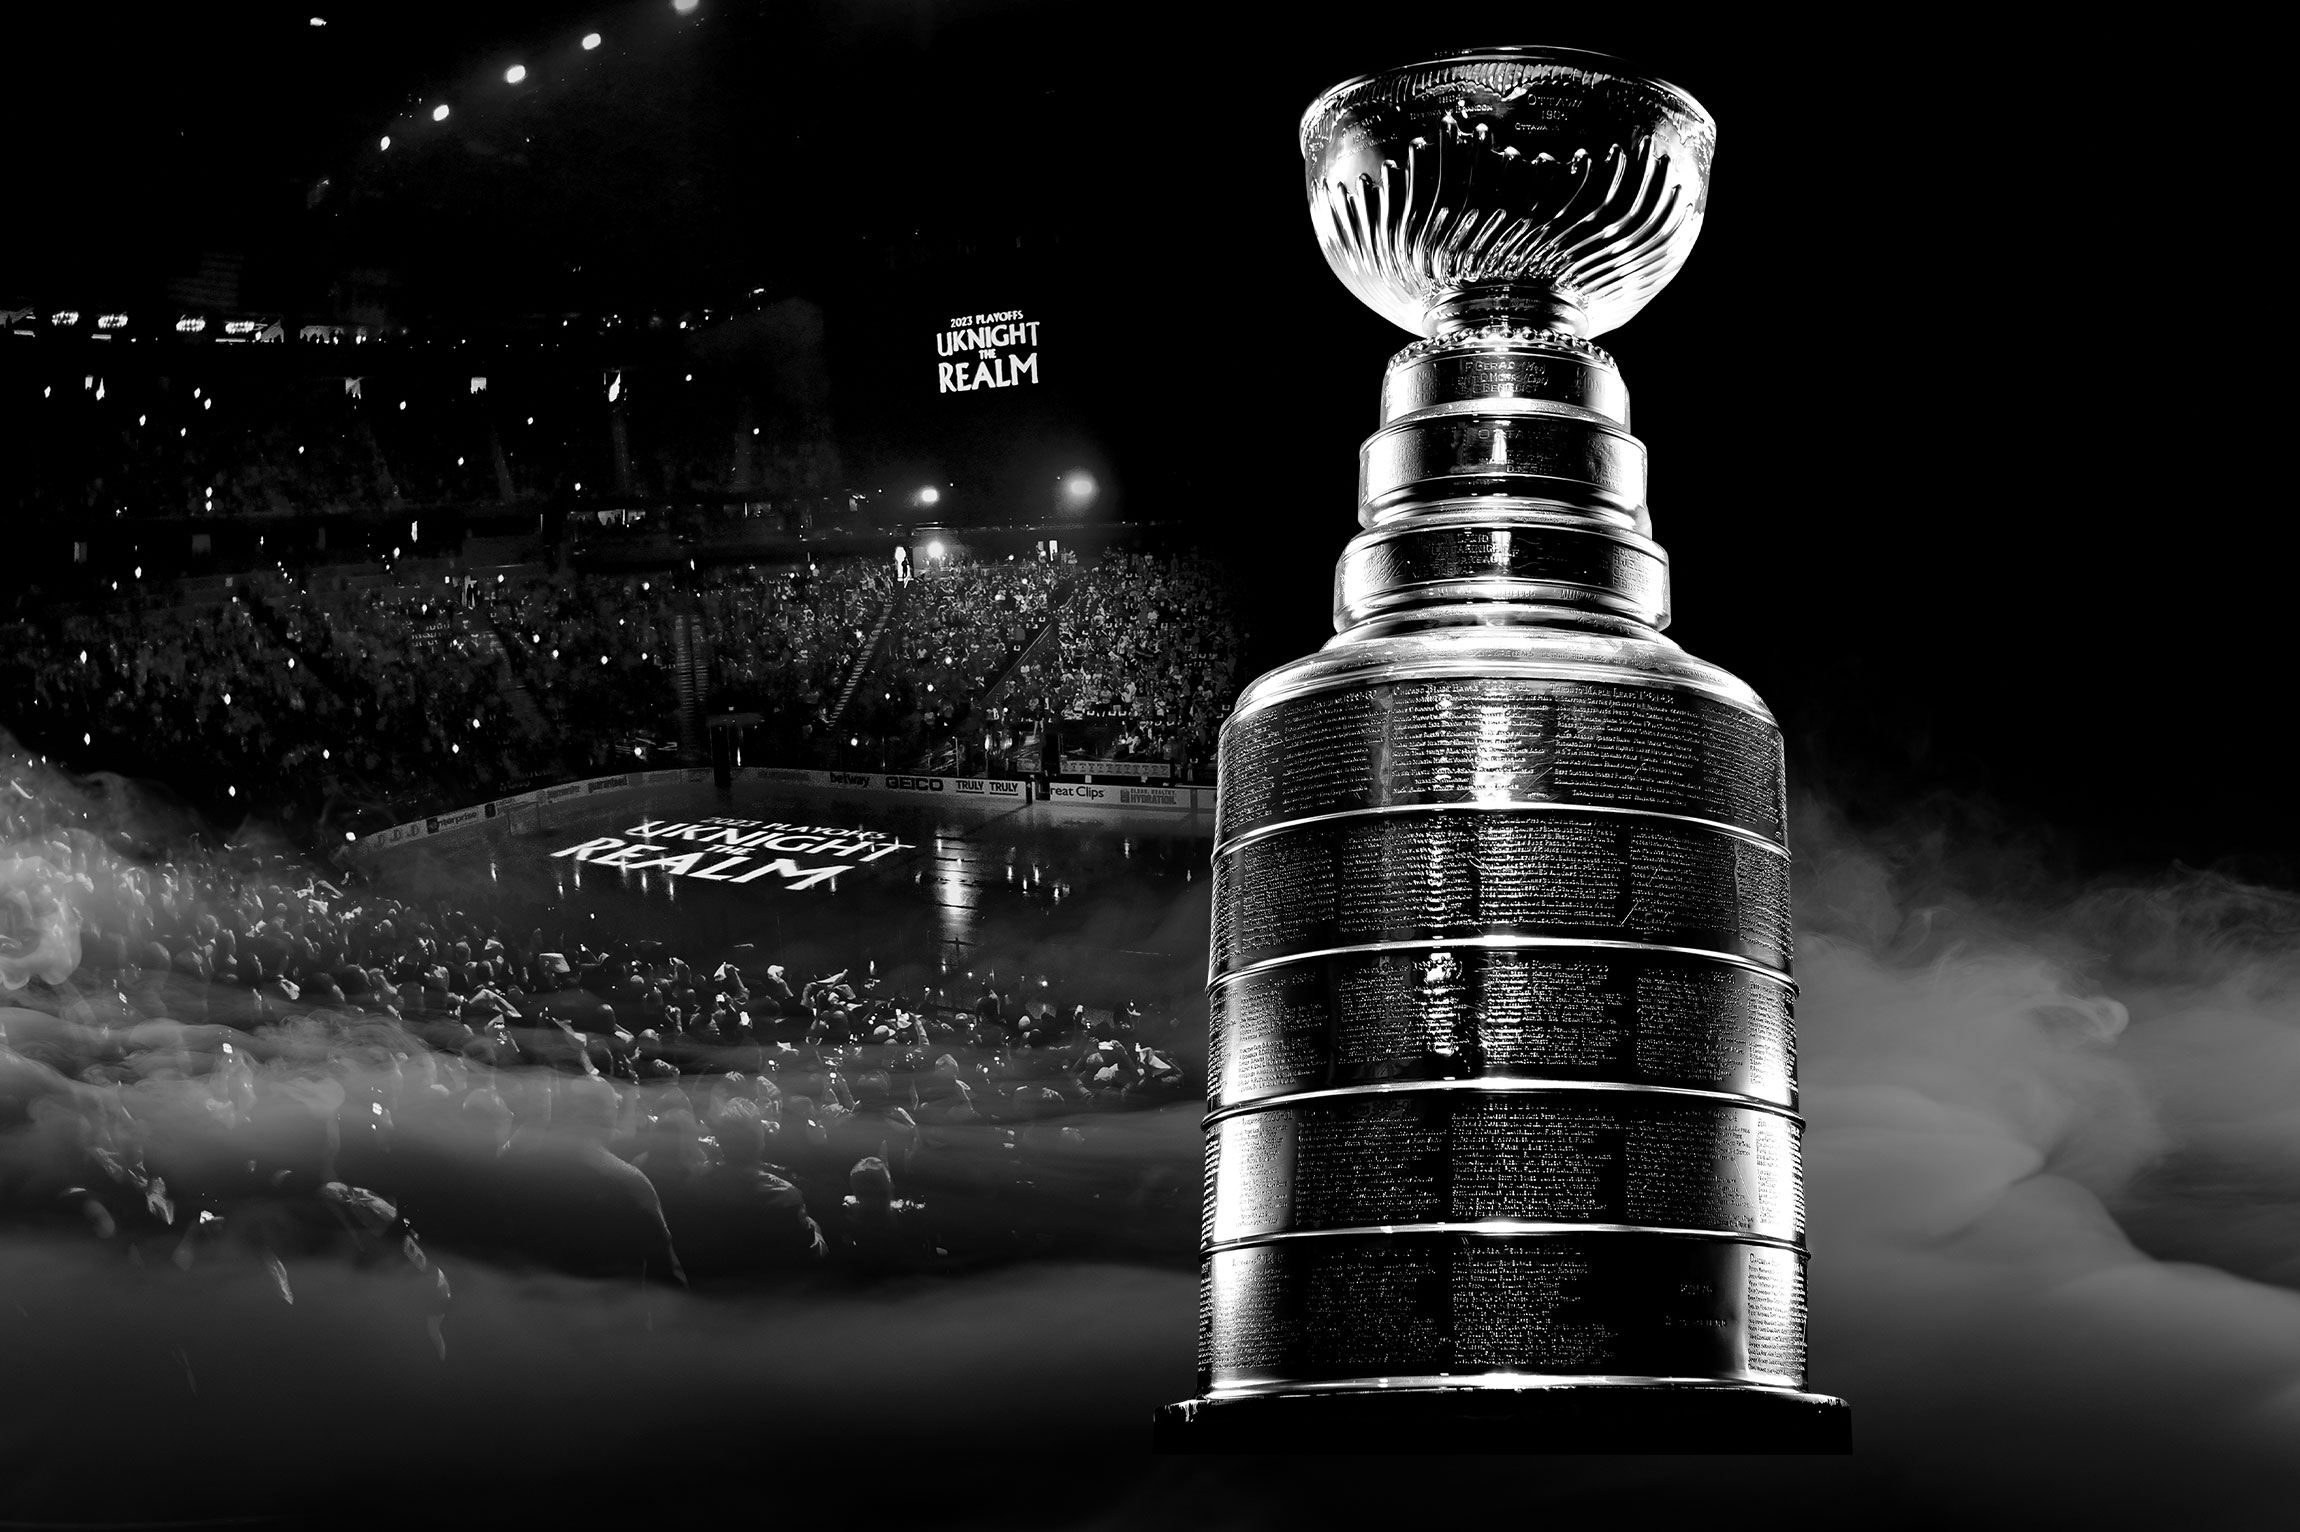 Stanley Cup finals averages 4.59m viewers on ABC - SportsPro